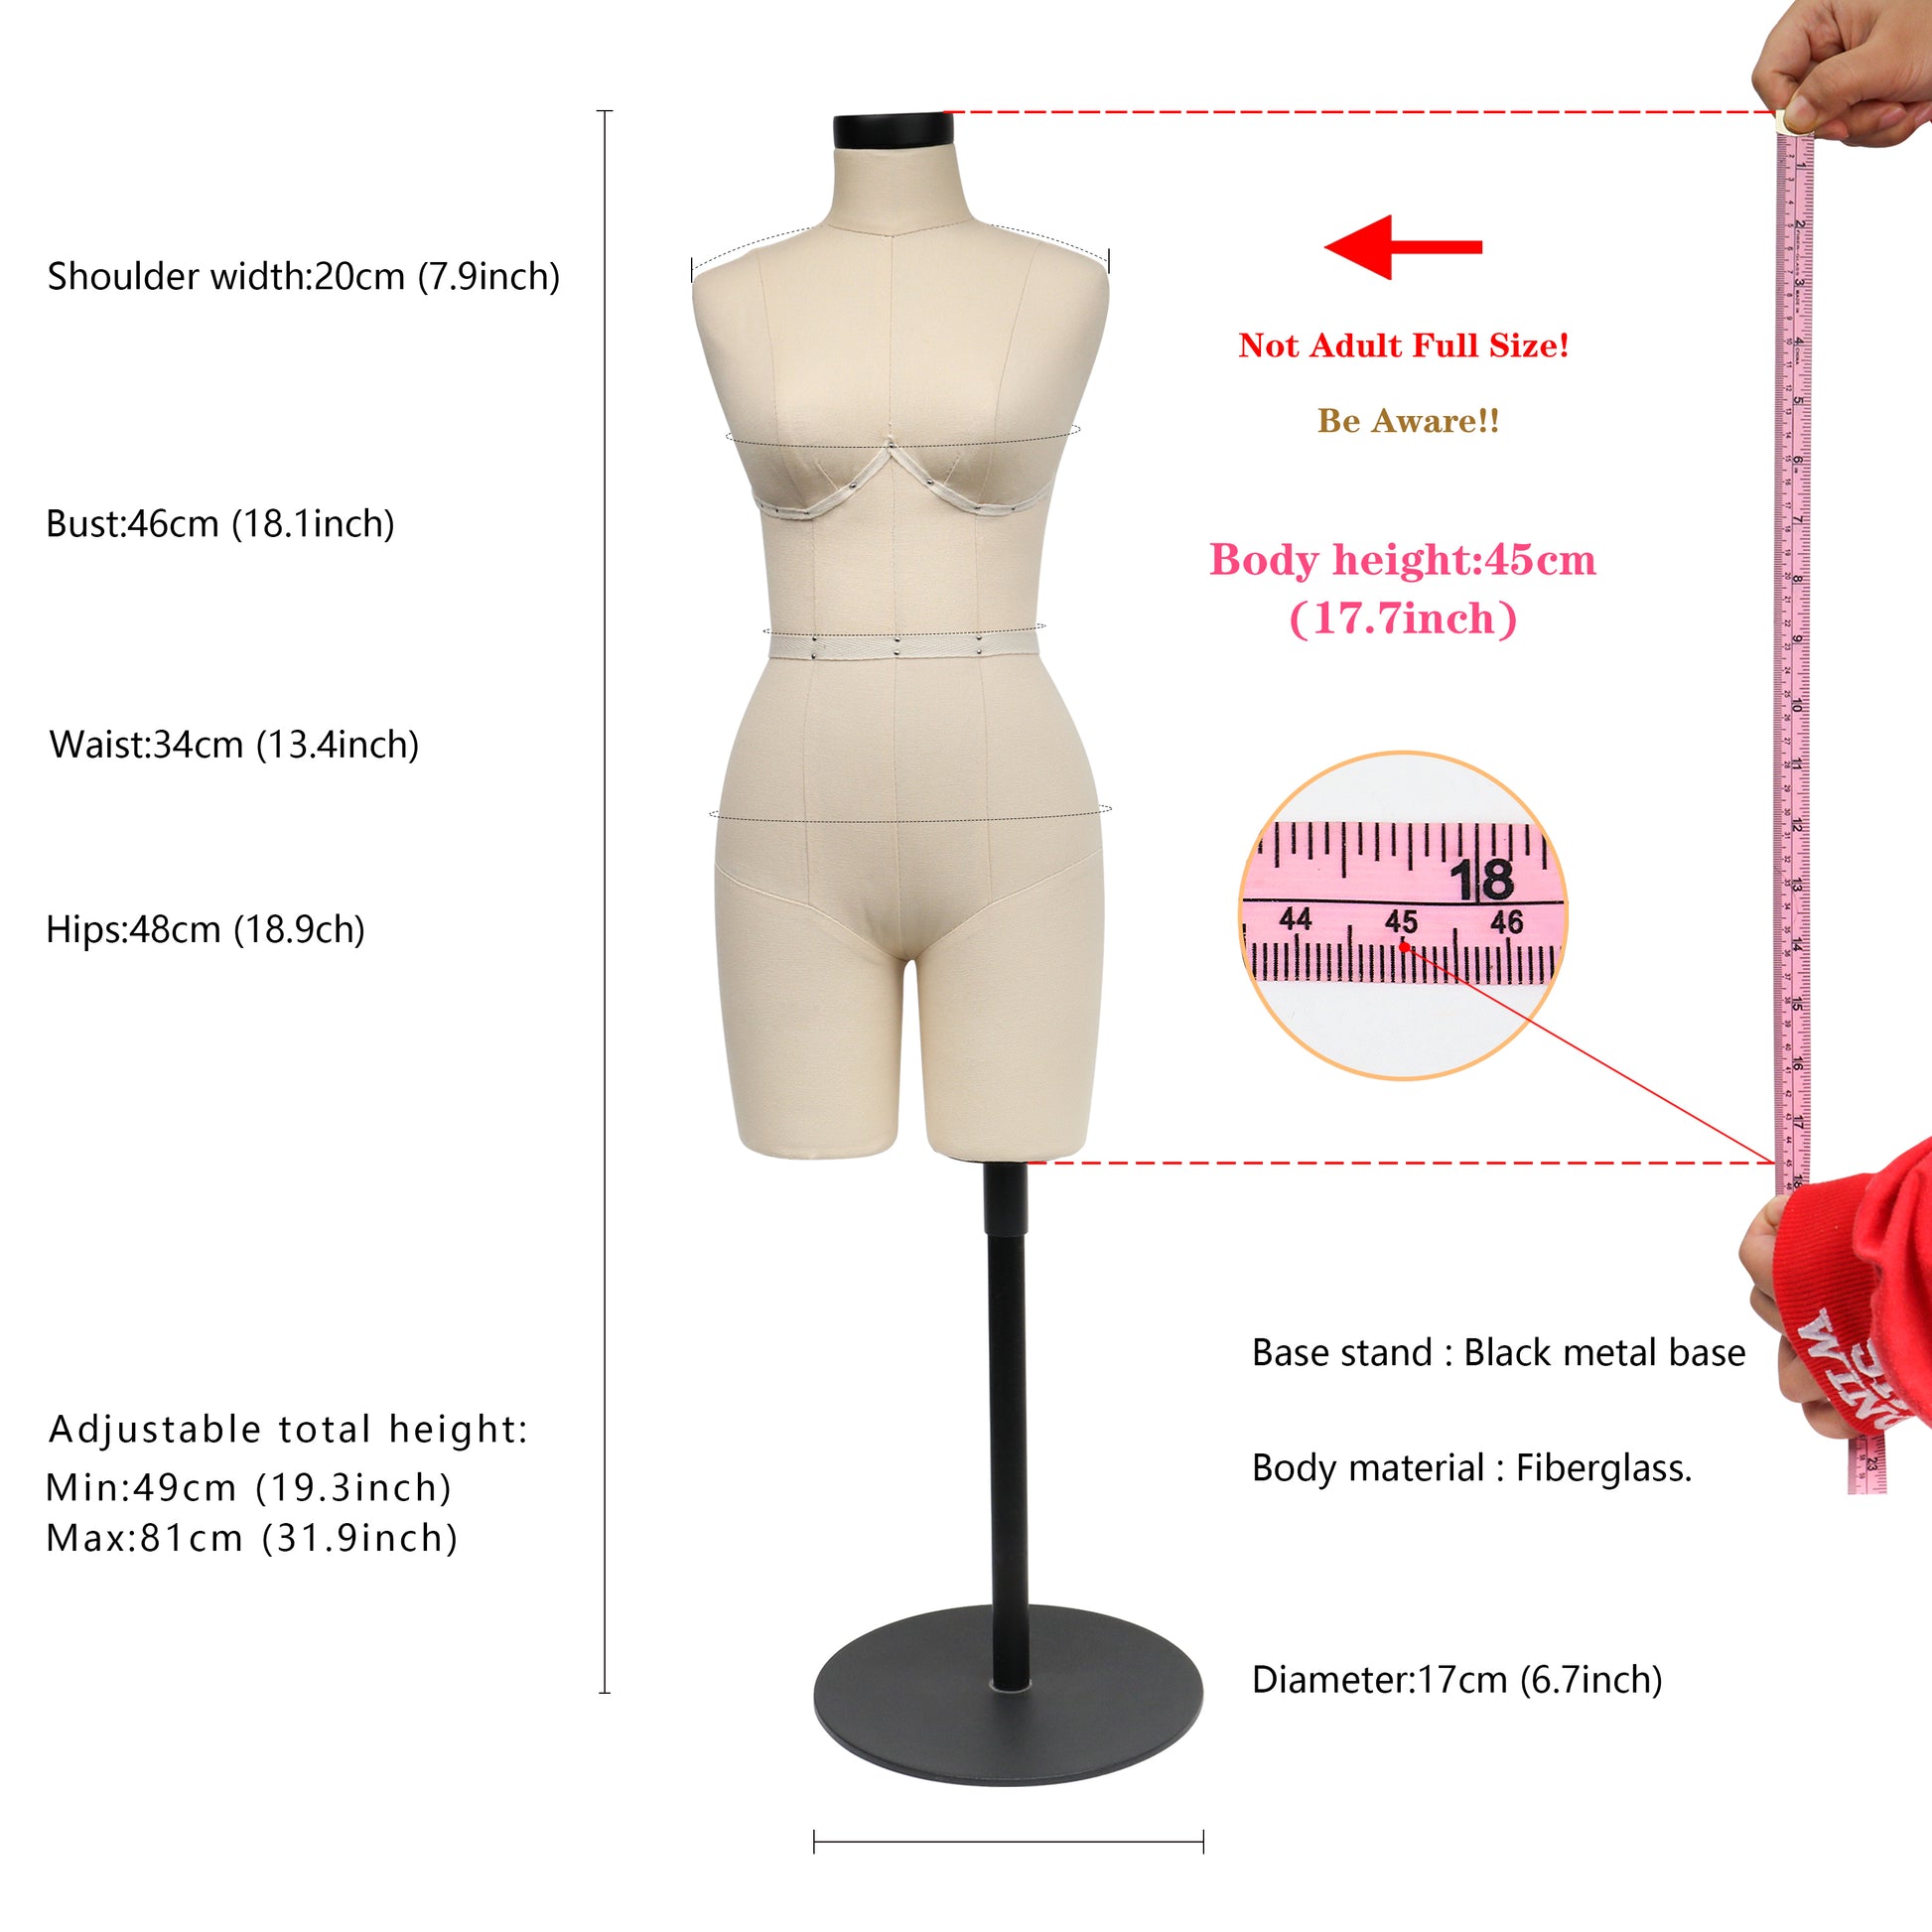 Jelimate 1/3 Or 1/4 Or 1/2 Scale Female Dress Form for Sewing Dress Form  Model,Fully Pinnable Women Tailor Mannequin Doll,Fashion Designer Mini